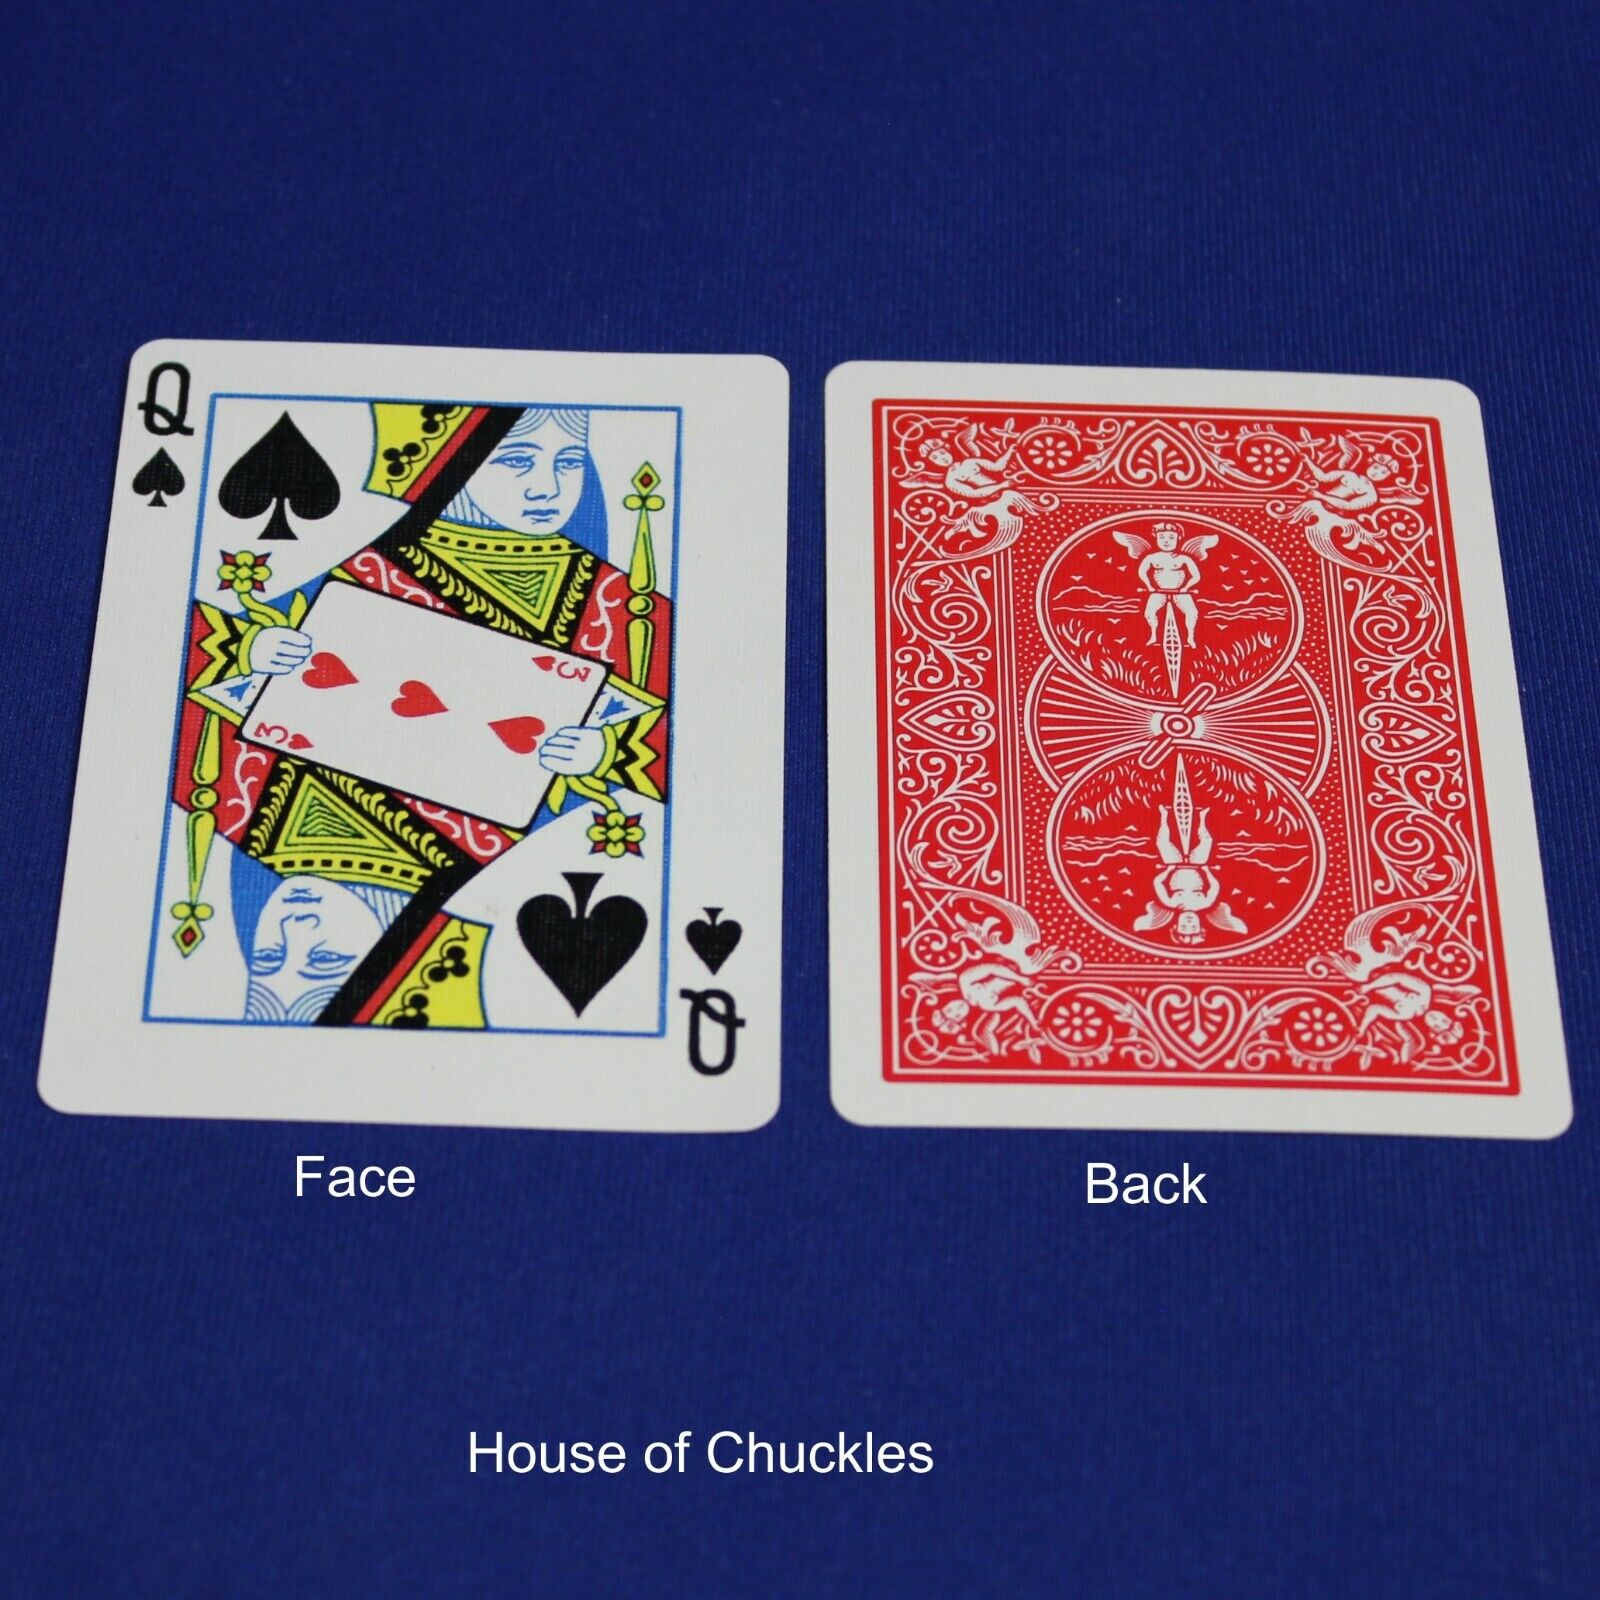 Queen of Spades reveals 3 of Hearts - Red Bicycle Gaff Playing Card